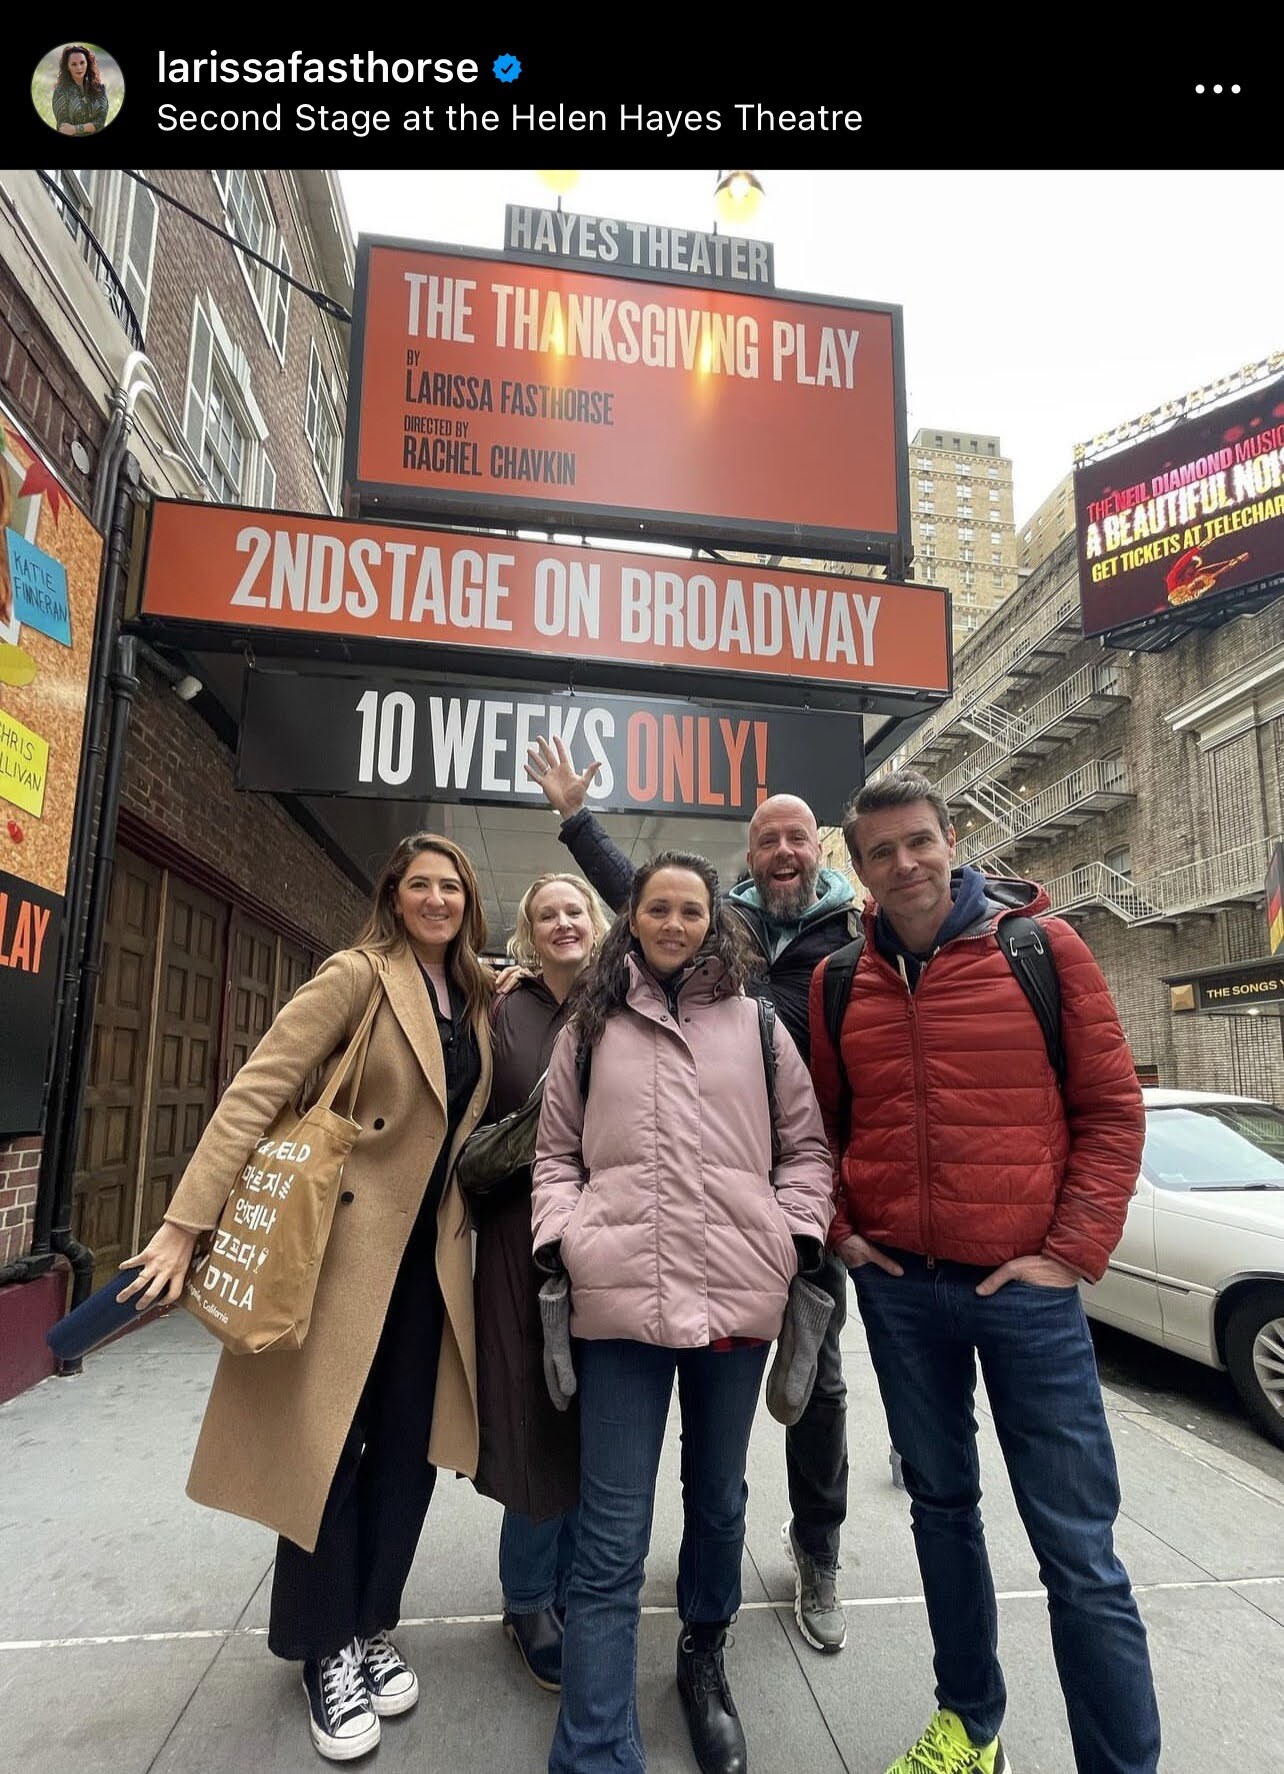 Three woman and two men pose for a picture together on a sidewalk in front of a theatre.